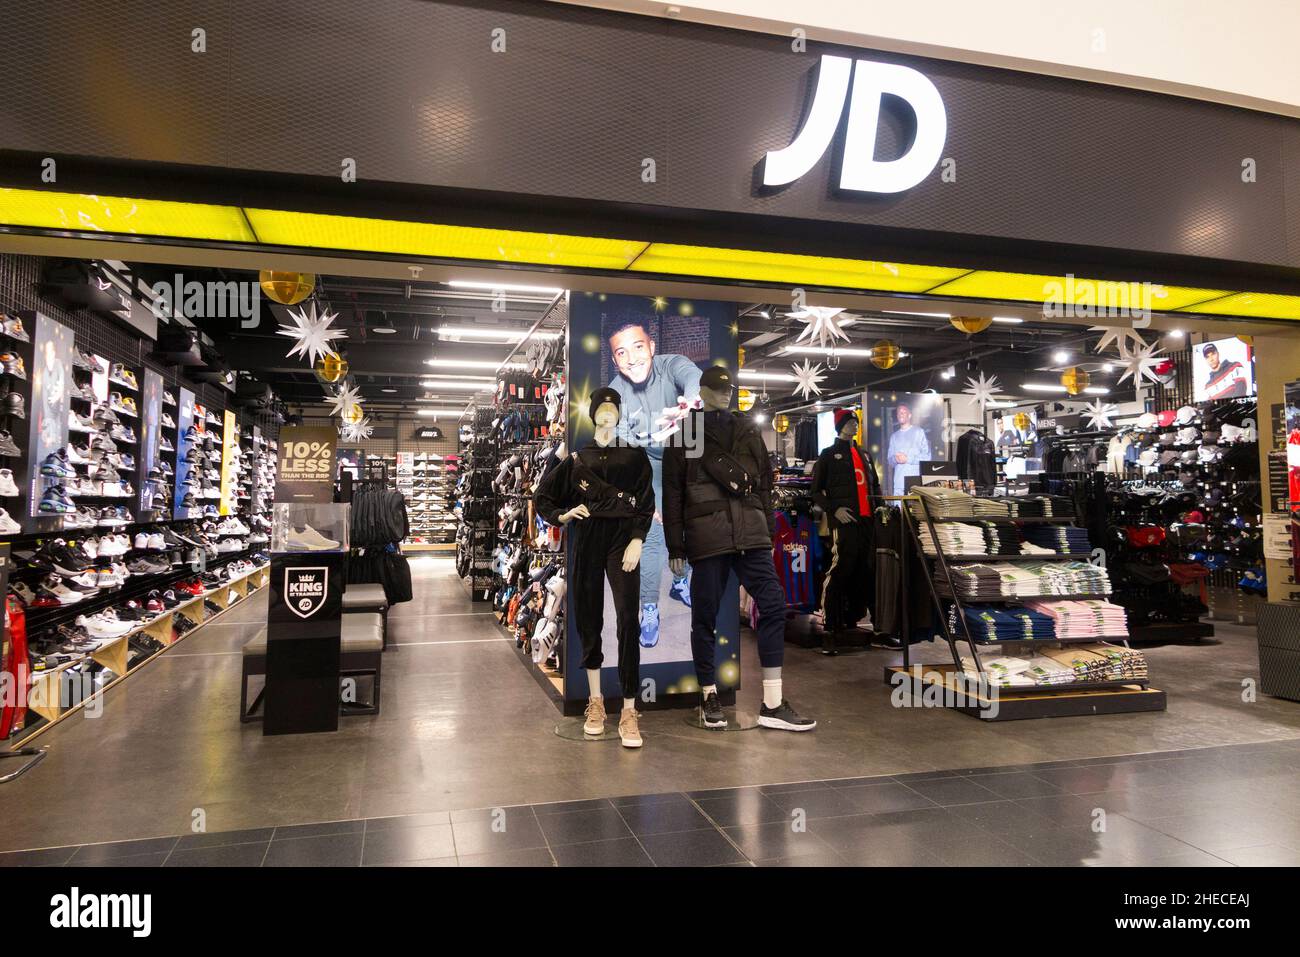 JD Sports shop with open walk in display and sign for the airside retail store at Gatwick airport North Terminal. London. UK. (128) Stock Photo